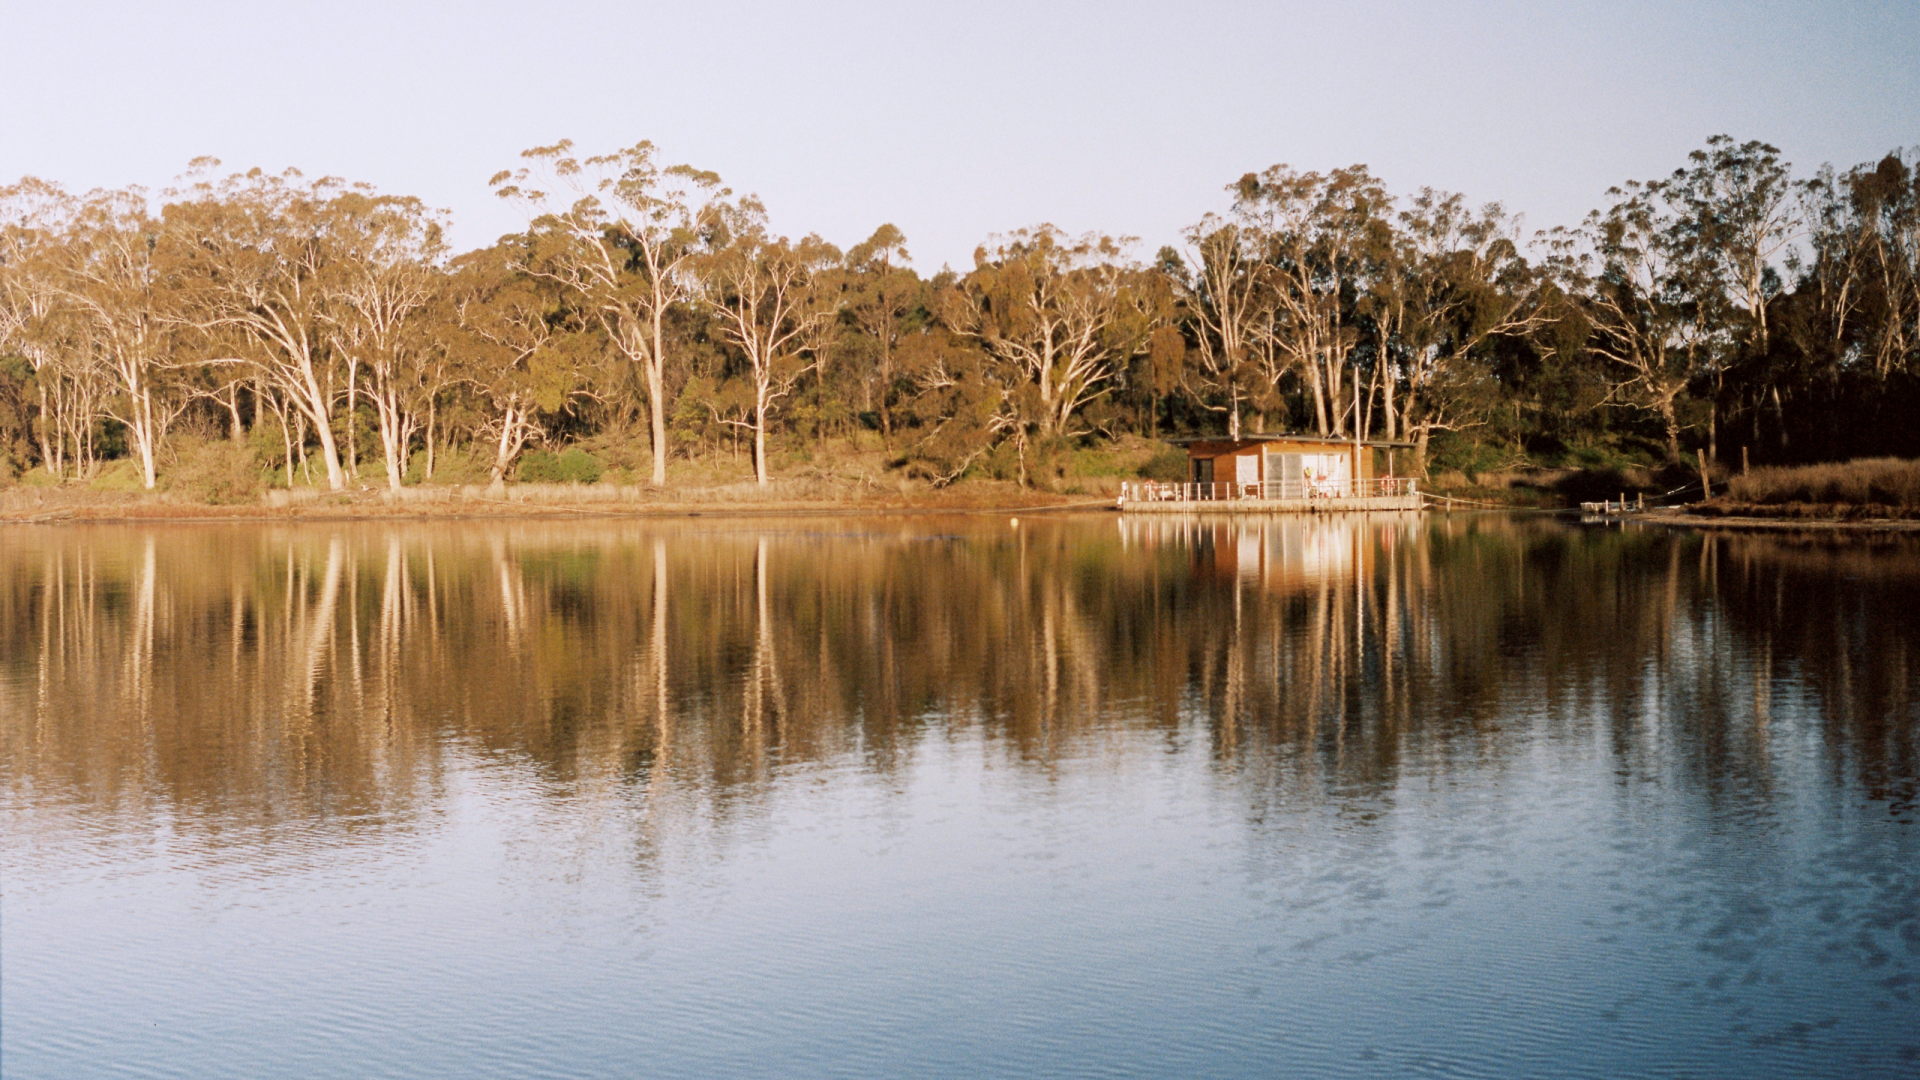 A lake with a houseboat surrounded by gum trees with large reflections in the lake water